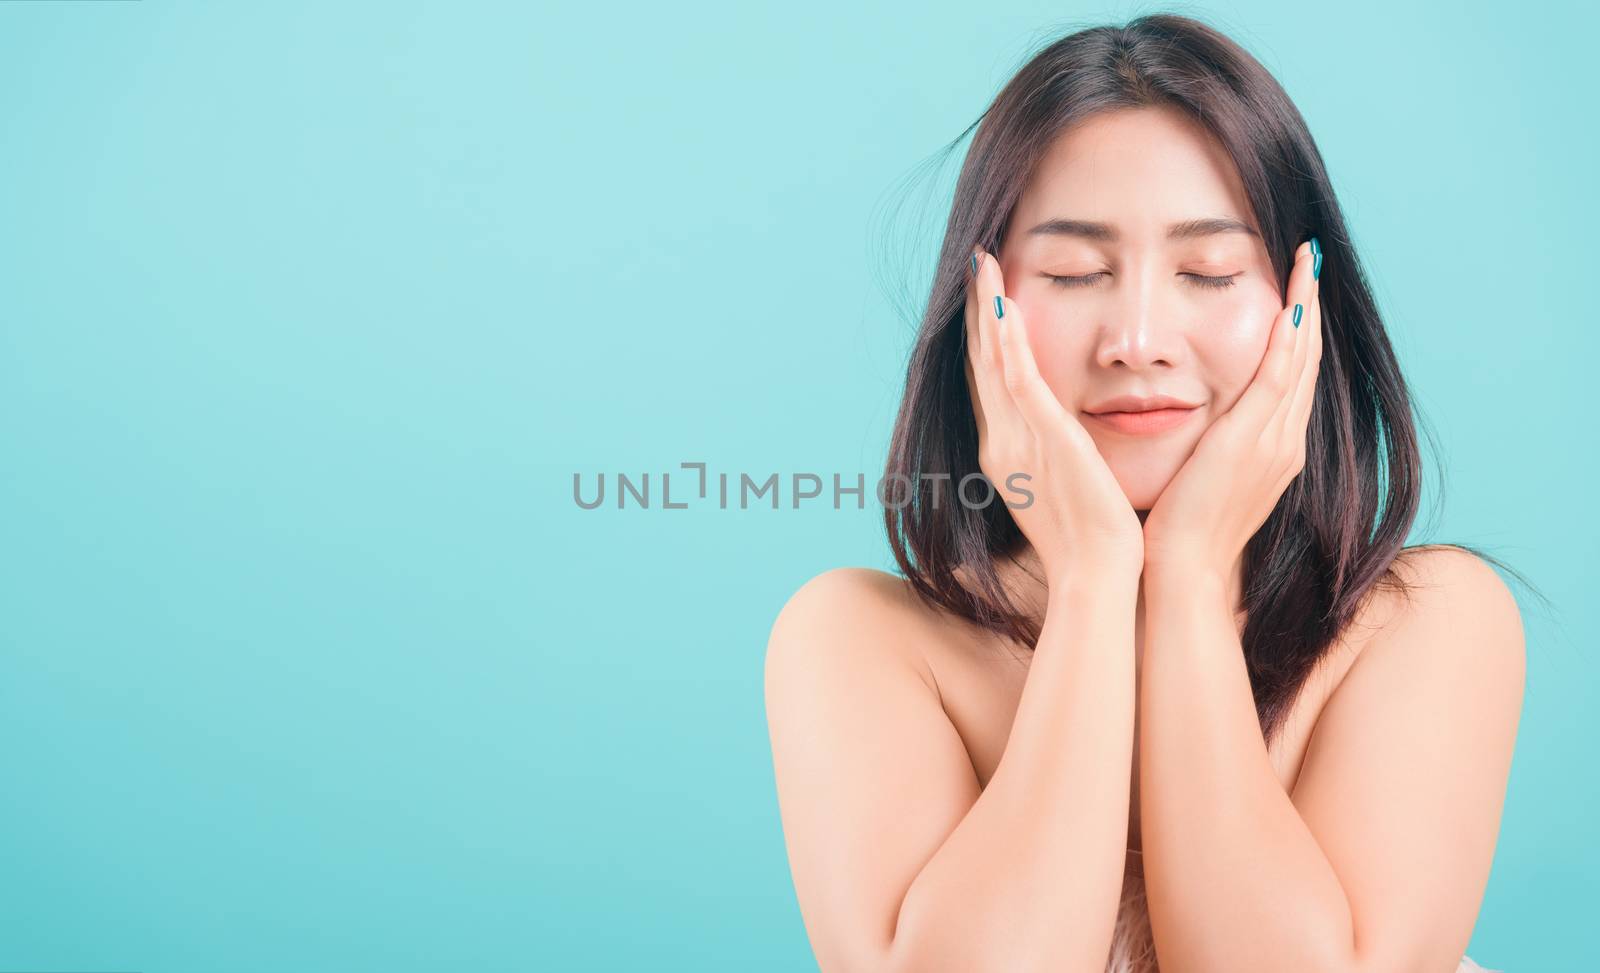 Asian happy portrait beautiful young woman standing smiling surprised excited her hands over her face and looking to camera on blue background with banner copy space for text